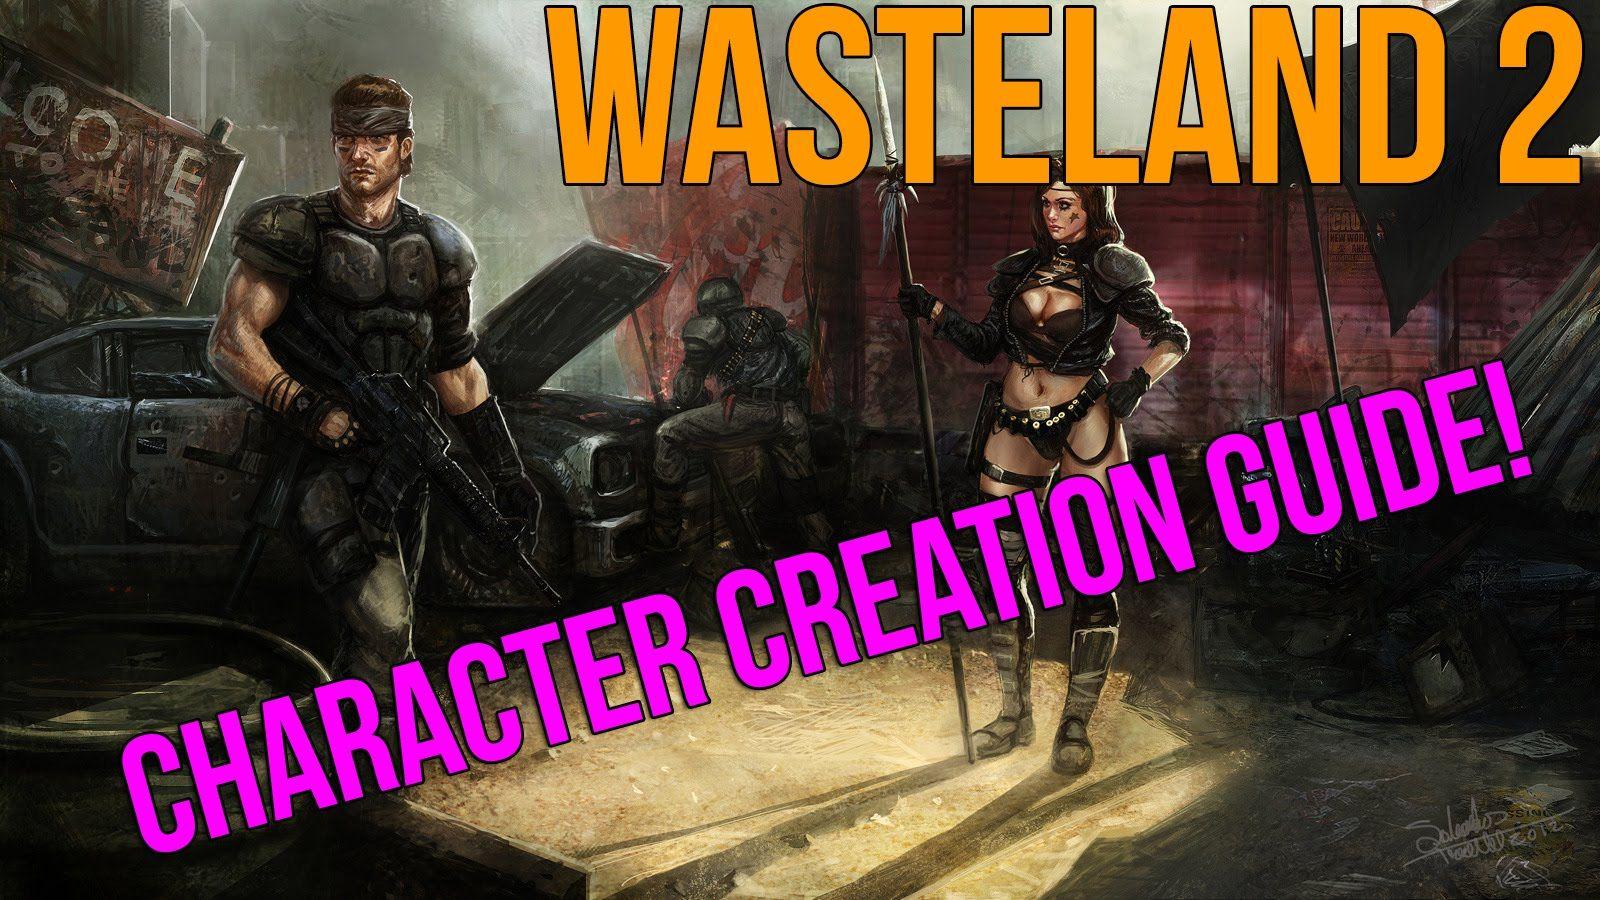 Wasteland 2: Character Creation Guide You Need To Know